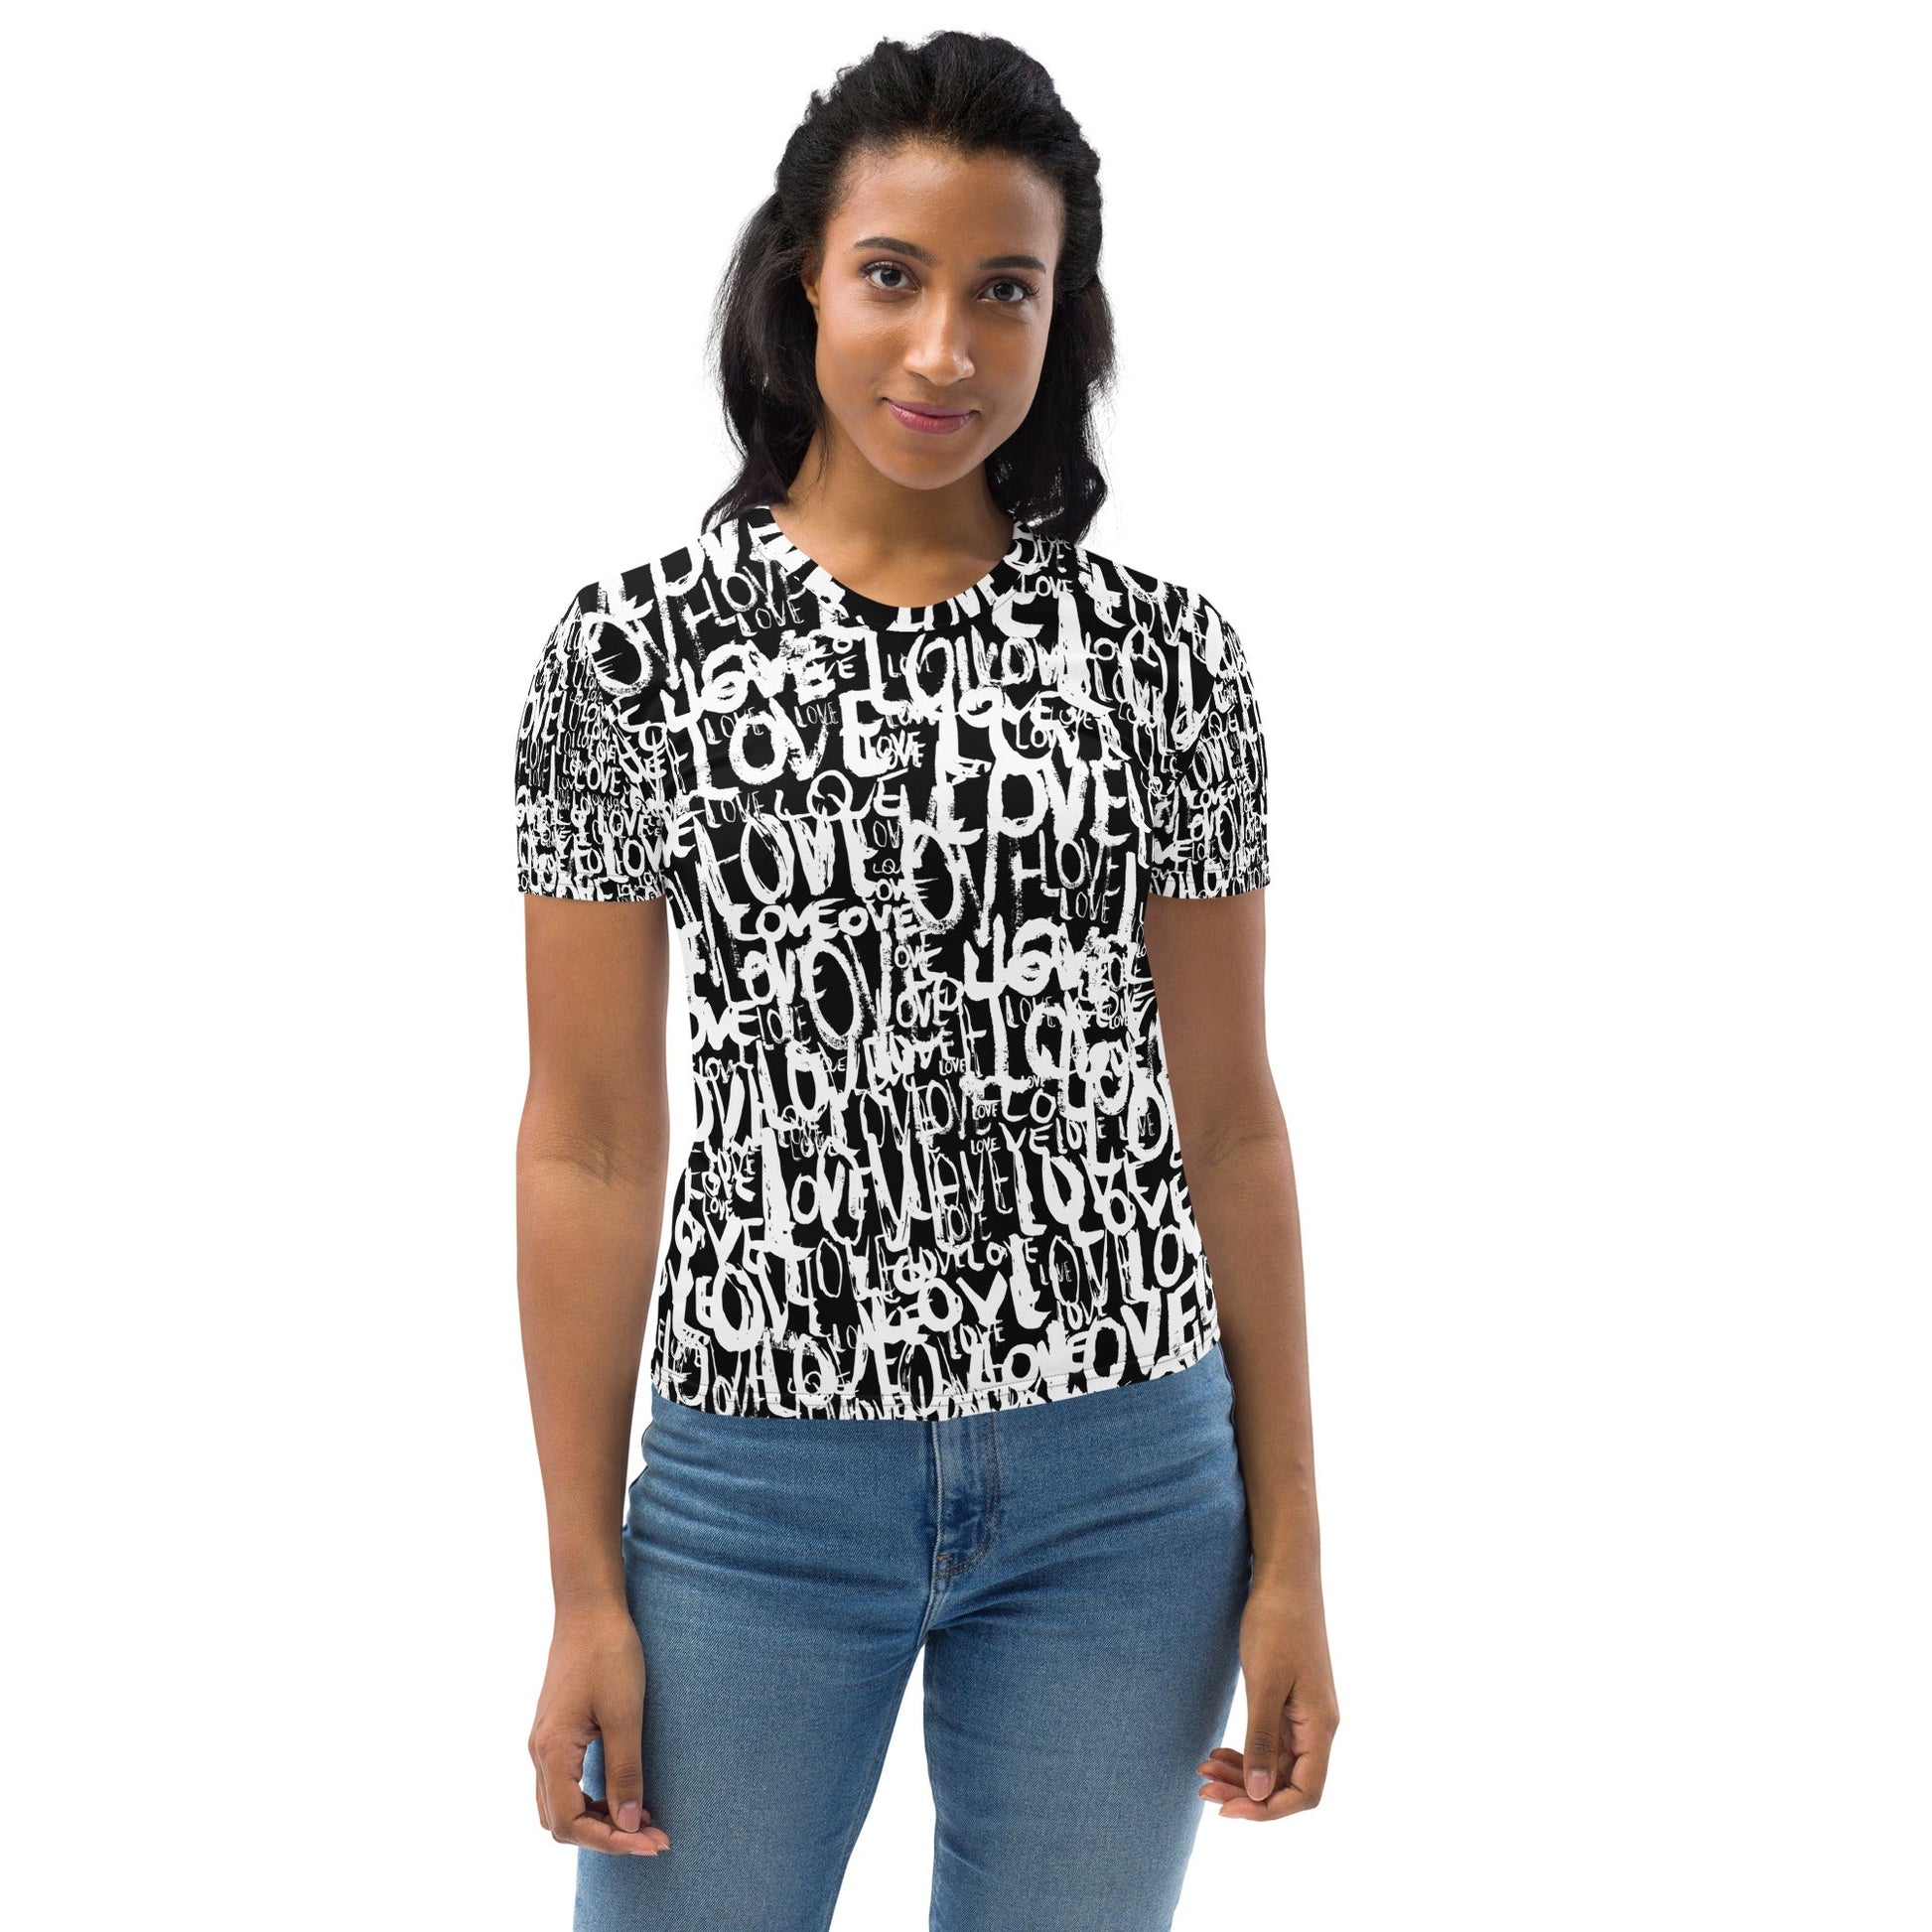 The Love Minimal - Women's All over T-shirt apparel